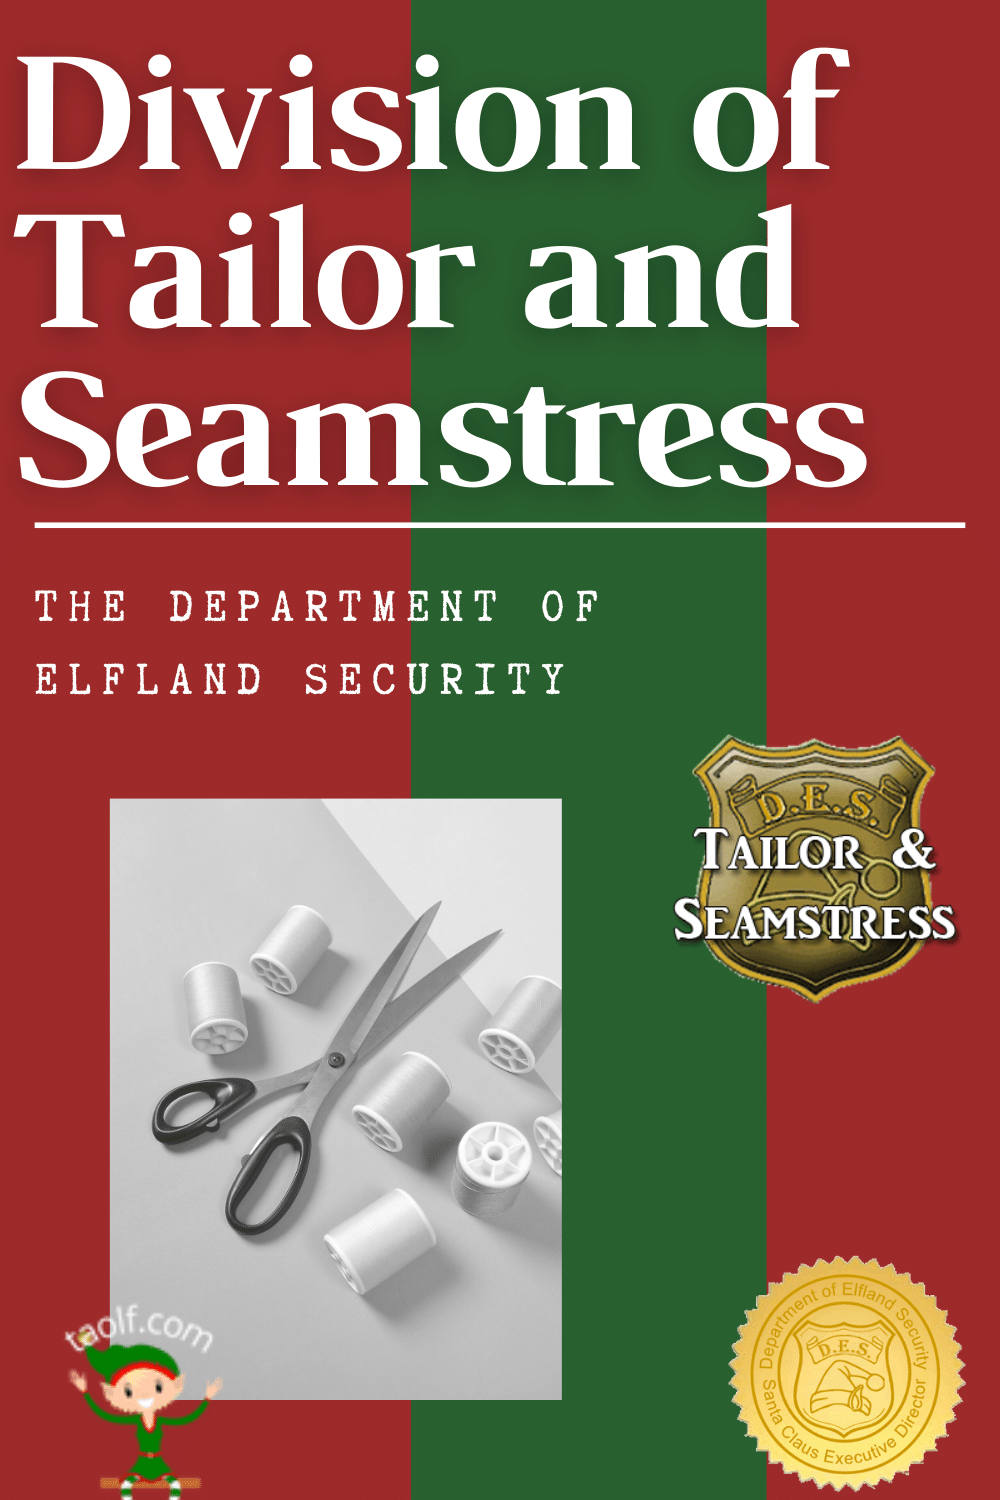 Division of Tailor and Seamstress